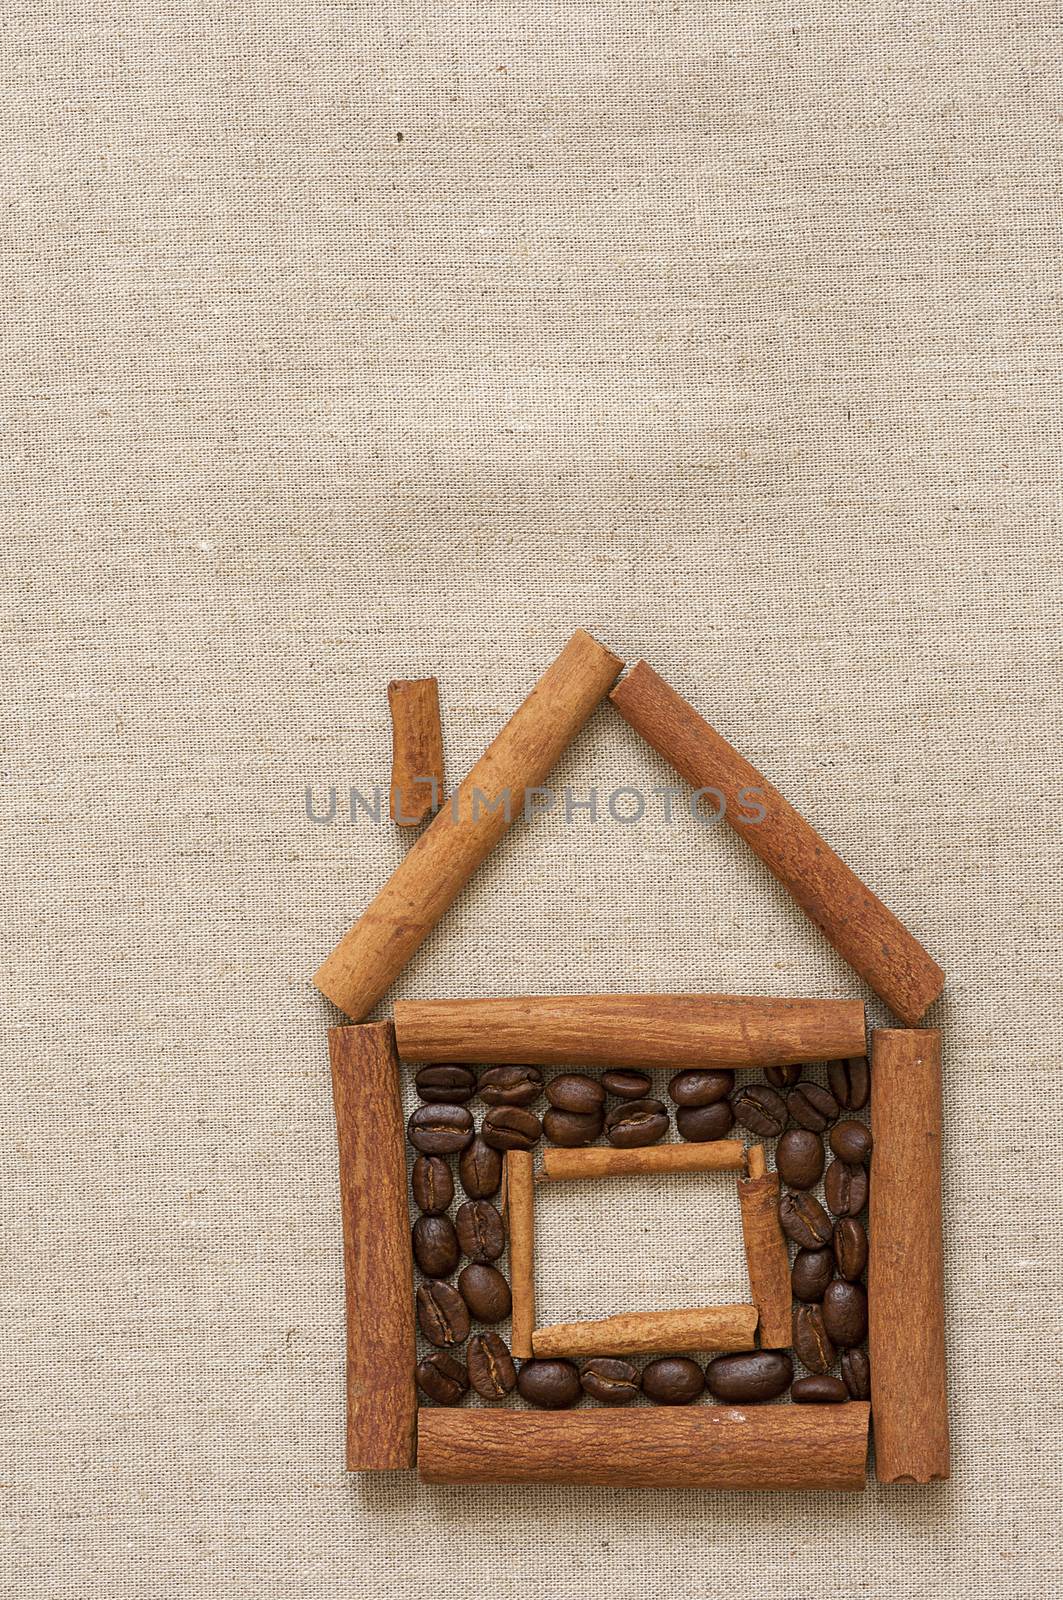 Cinnamon and coffee house by dred